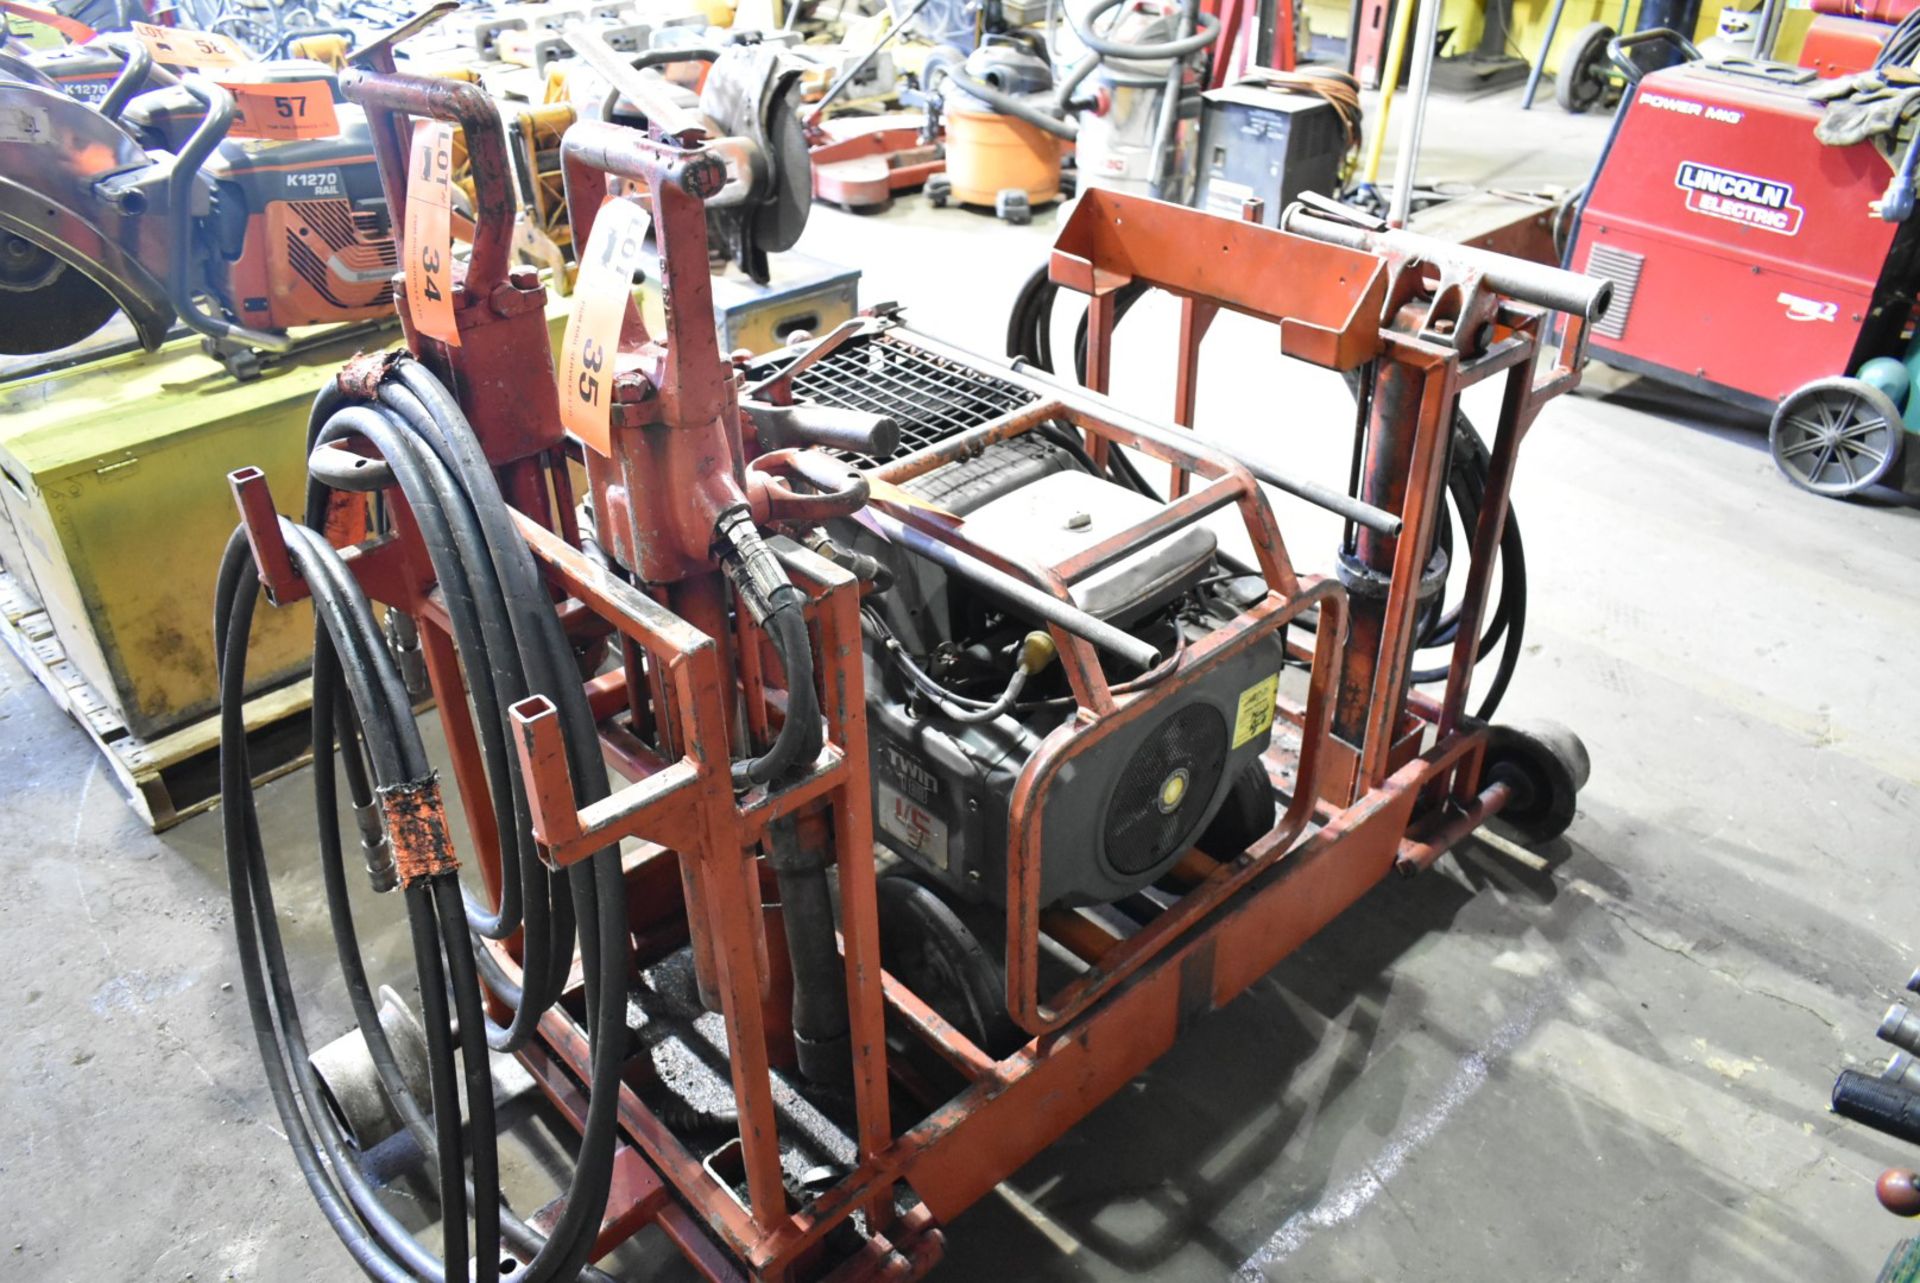 MFG N/A RAIL CART MOUNTED PORTABLE HYDRAULIC POWER PACK WITH VANGUARD 20HP GAS ENGINE S/N: N/A - Image 2 of 4